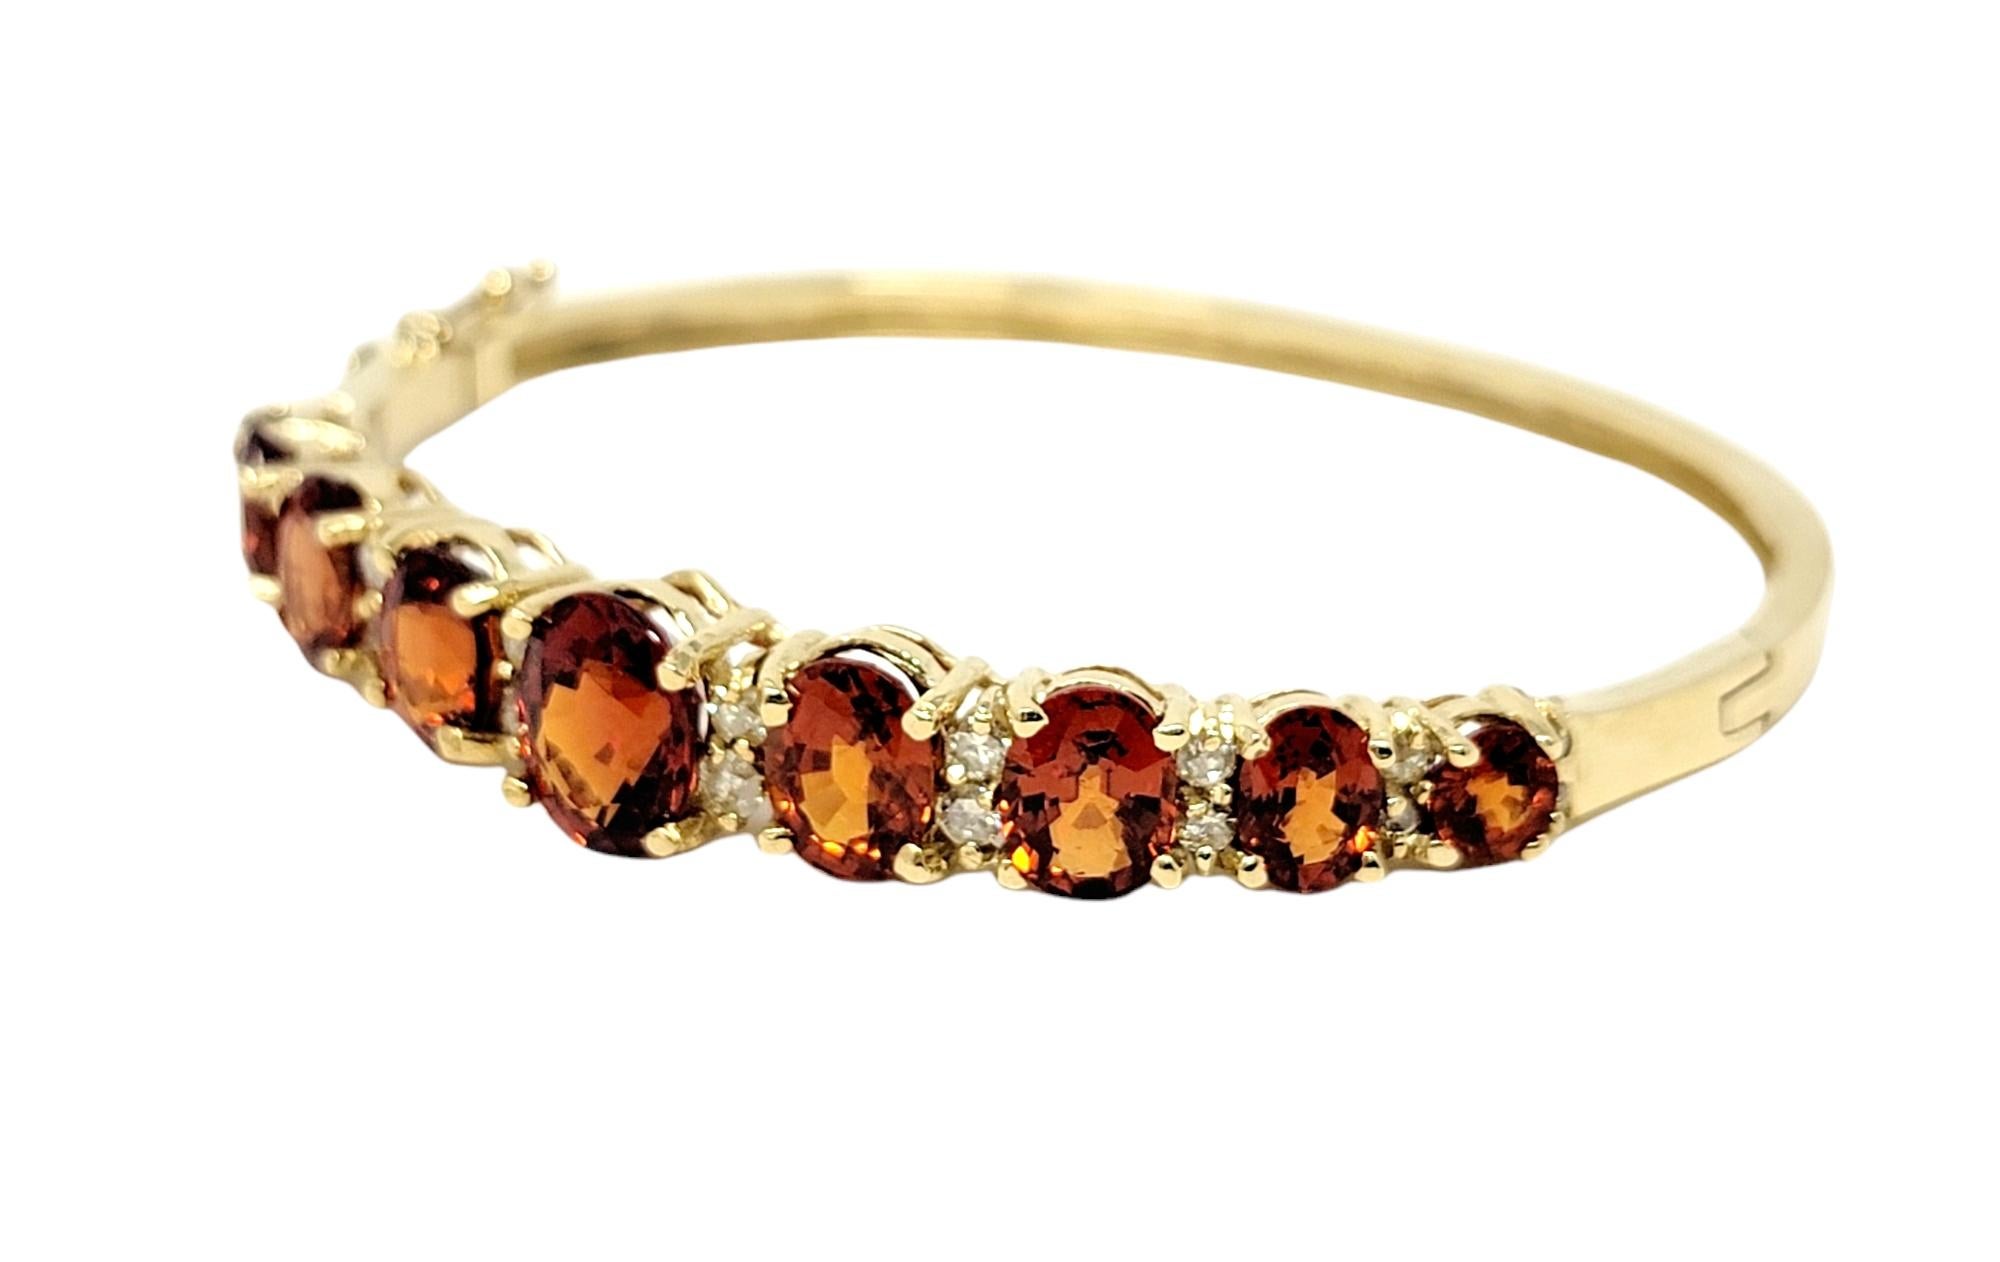 Sleek and elegant yellow gold bangle bracelet with colorful sparkling spessartine garnet and diamond detailing. This chic hinged bangle features graduated bright reddish-orange garnets set in a single row accented by dazzling diamonds in between